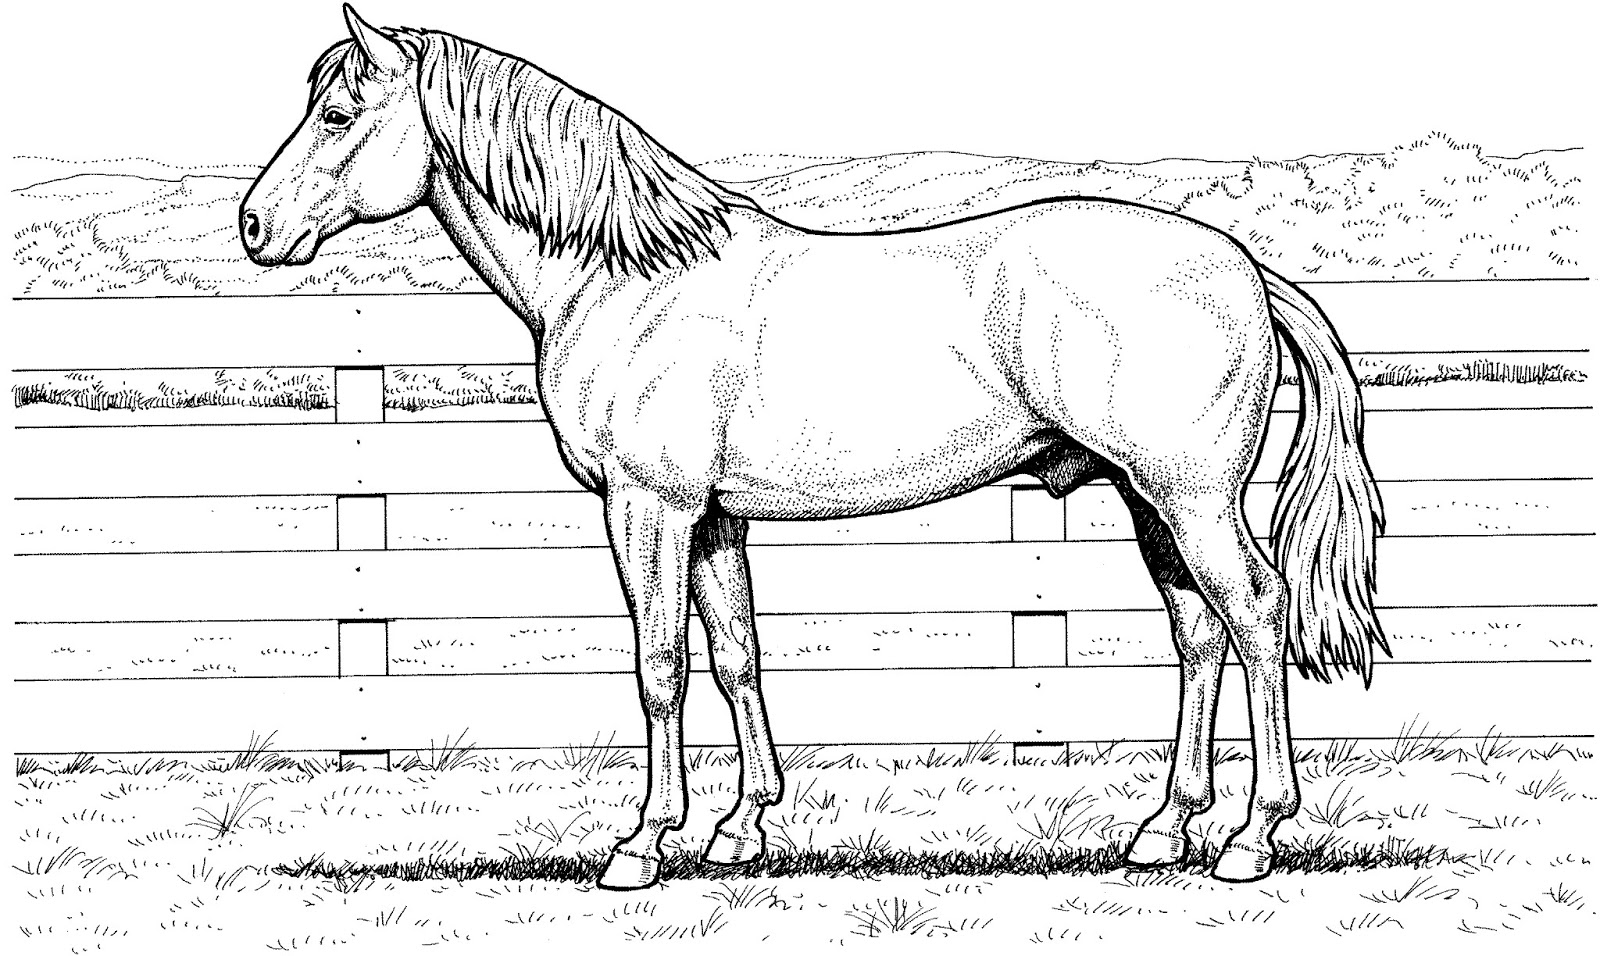 Realistic Coloring Pages Of Horses | Realistic Coloring Pages